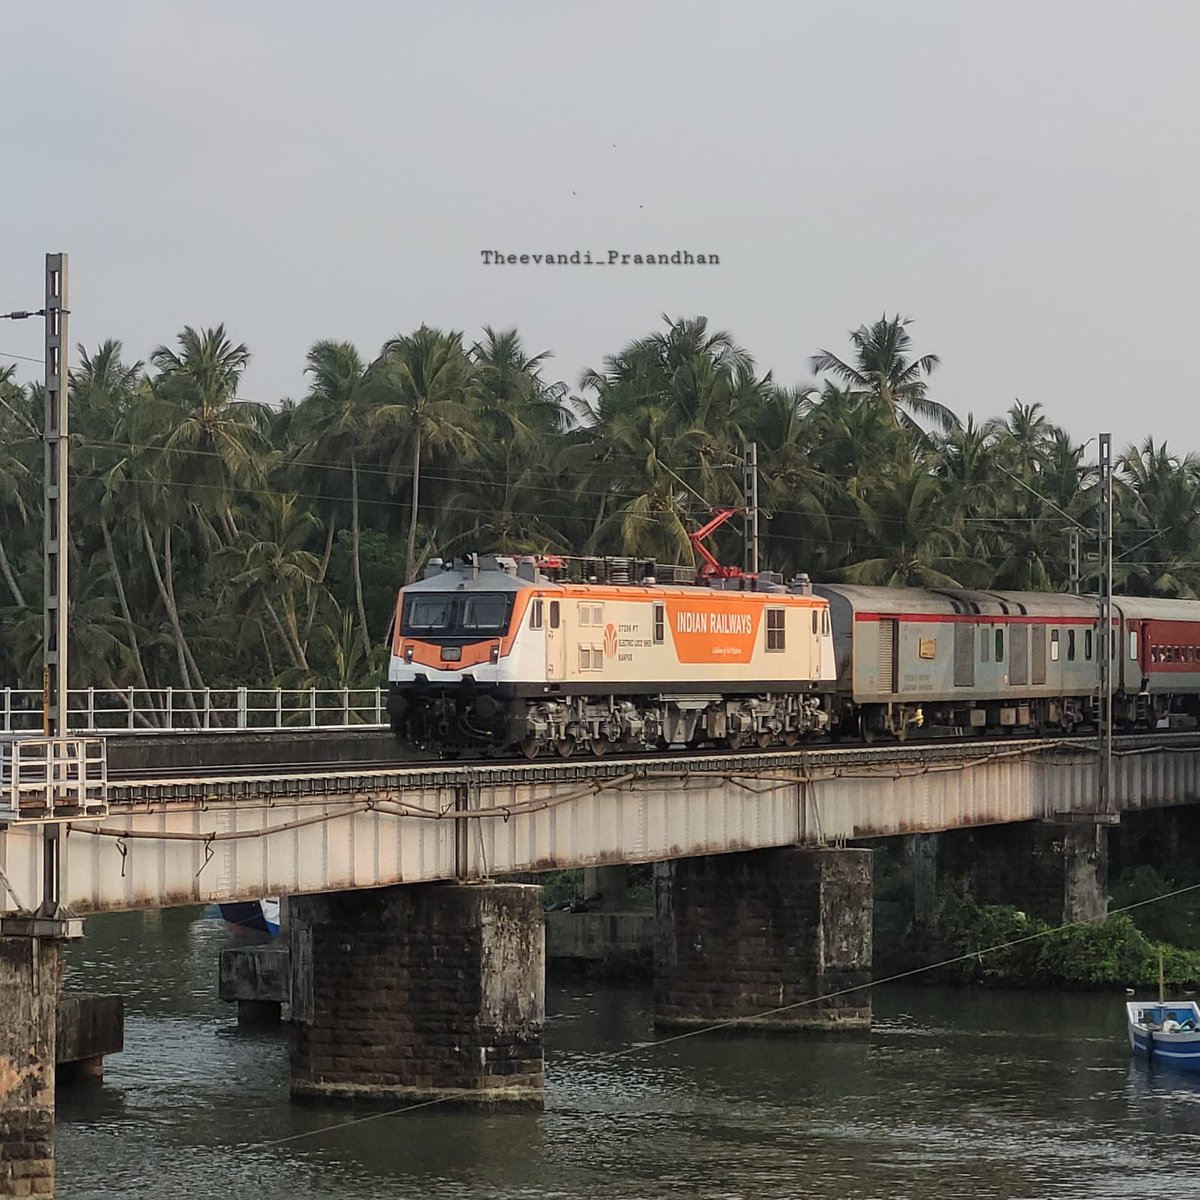 Celebrity loco of Kanpur and second prize winner of the beauty contest... Kanpur WAP7 with 12483 Kochuveli - Amritsar weekly SF Express passing through the beautiful Korapuzha river...💚💚

Awesome Click By: Gokul R

#scenicview #drmpalakkad #Kozhikode 

@GMSRailway @RailMinIndia